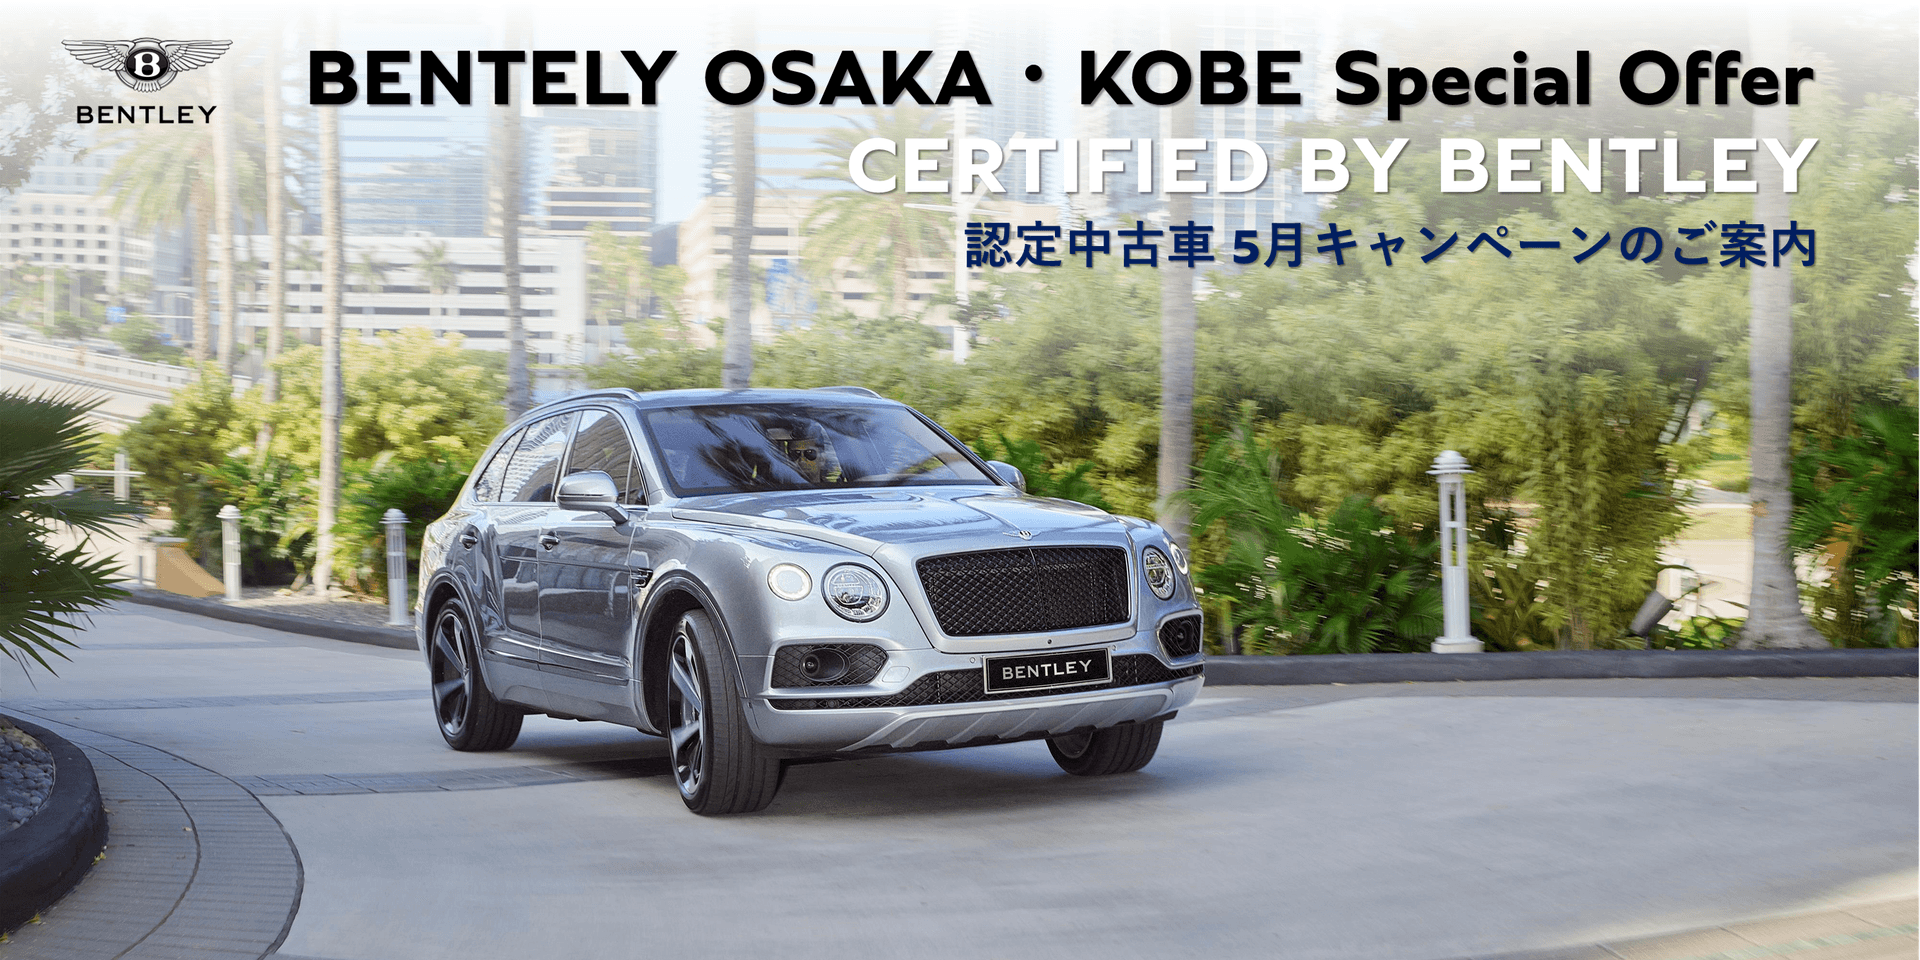 BENTELY OSAKA・KOBE Special Offer<br>
CERTIFIED BY BENTLEY<br>
認定中古車 5月キャンペーンのご案内